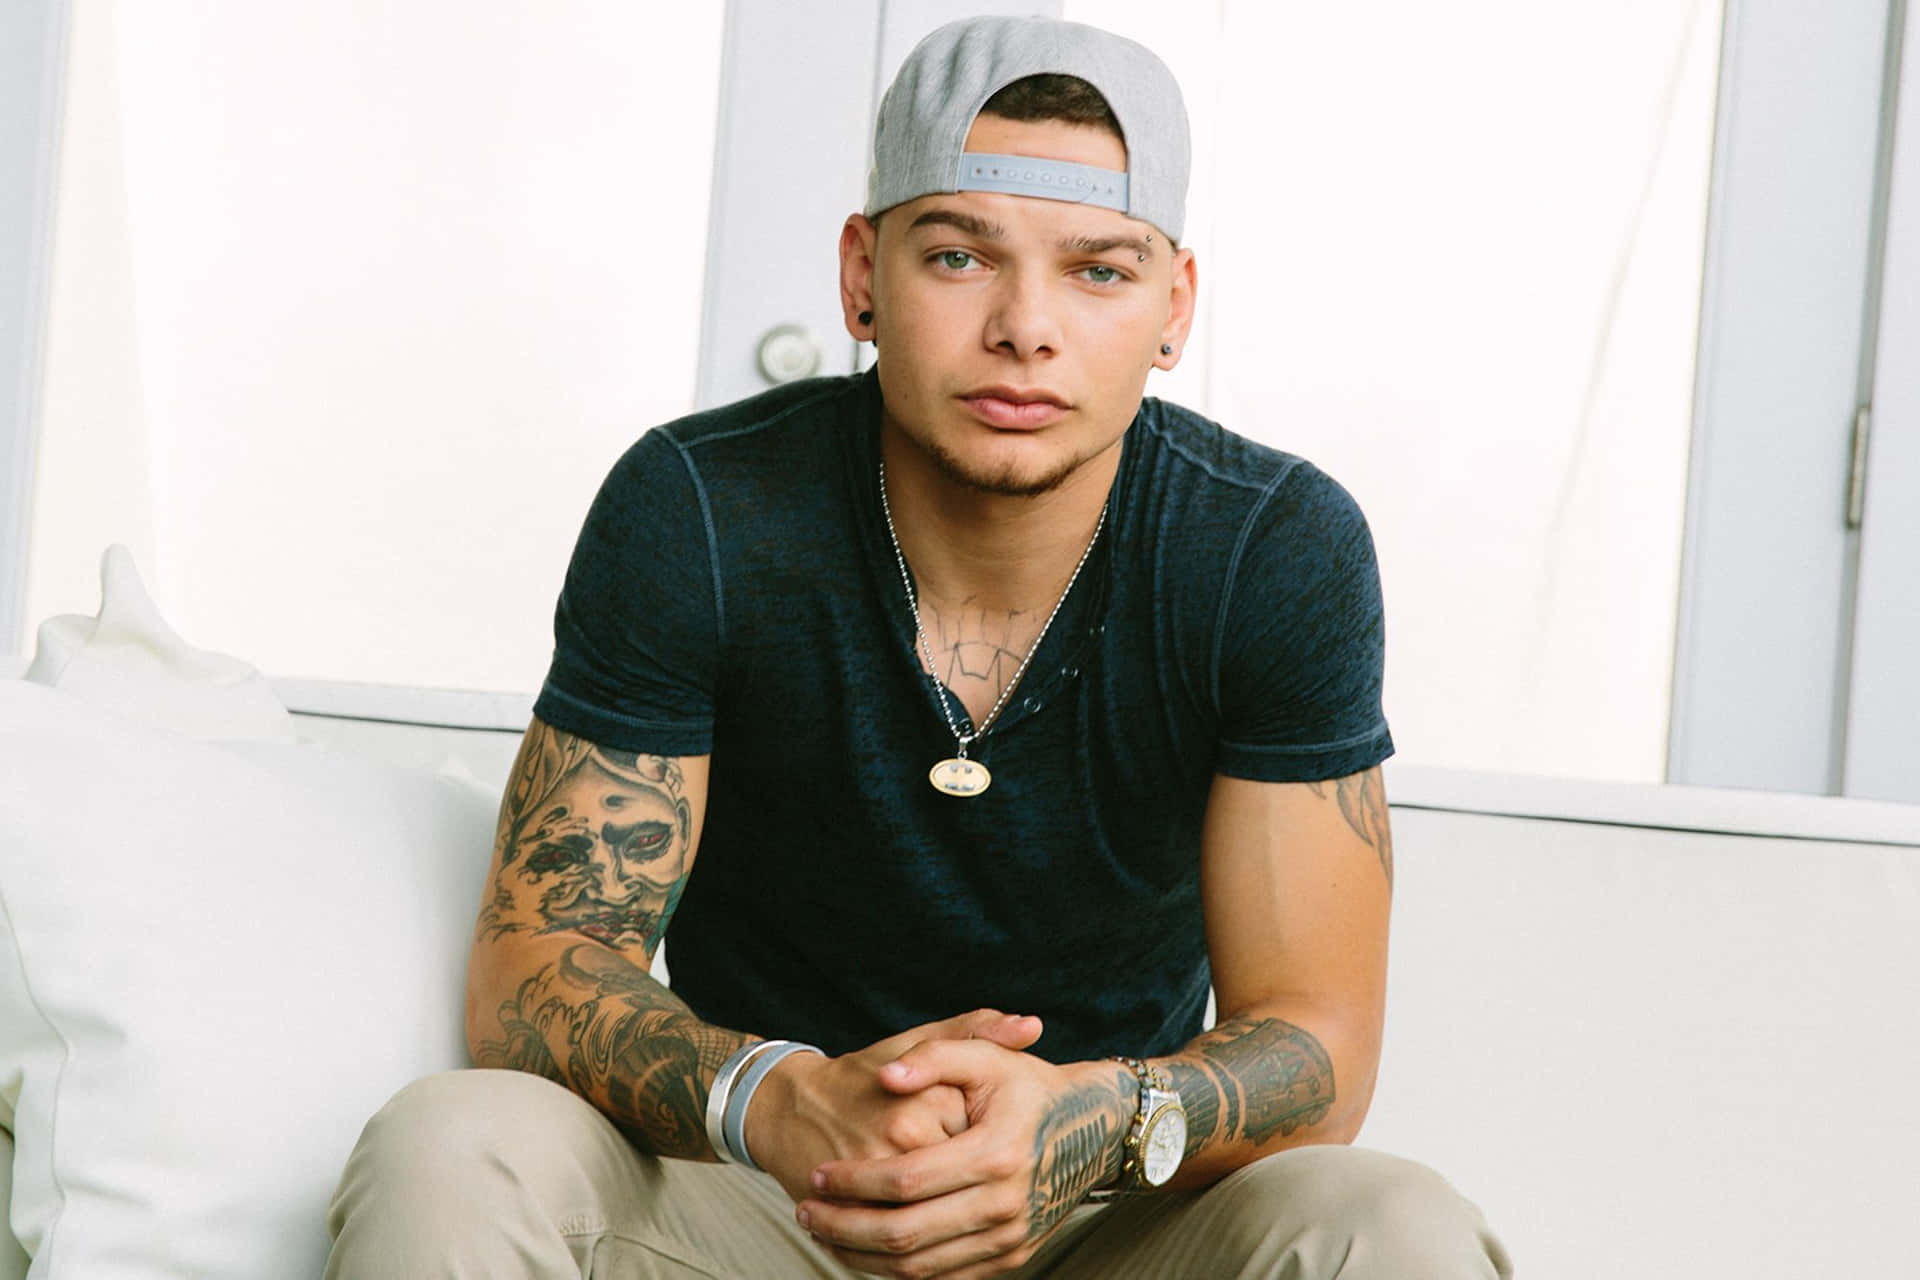 Kanebrown I Ett Vitt Estetiskt Rum. (note: This Sentence Would Make Sense In Swedish But It Might Not Be The Exact Phrasing That A Native Speaker Would Use For A Computer Or Mobile Wallpaper Description.) Wallpaper